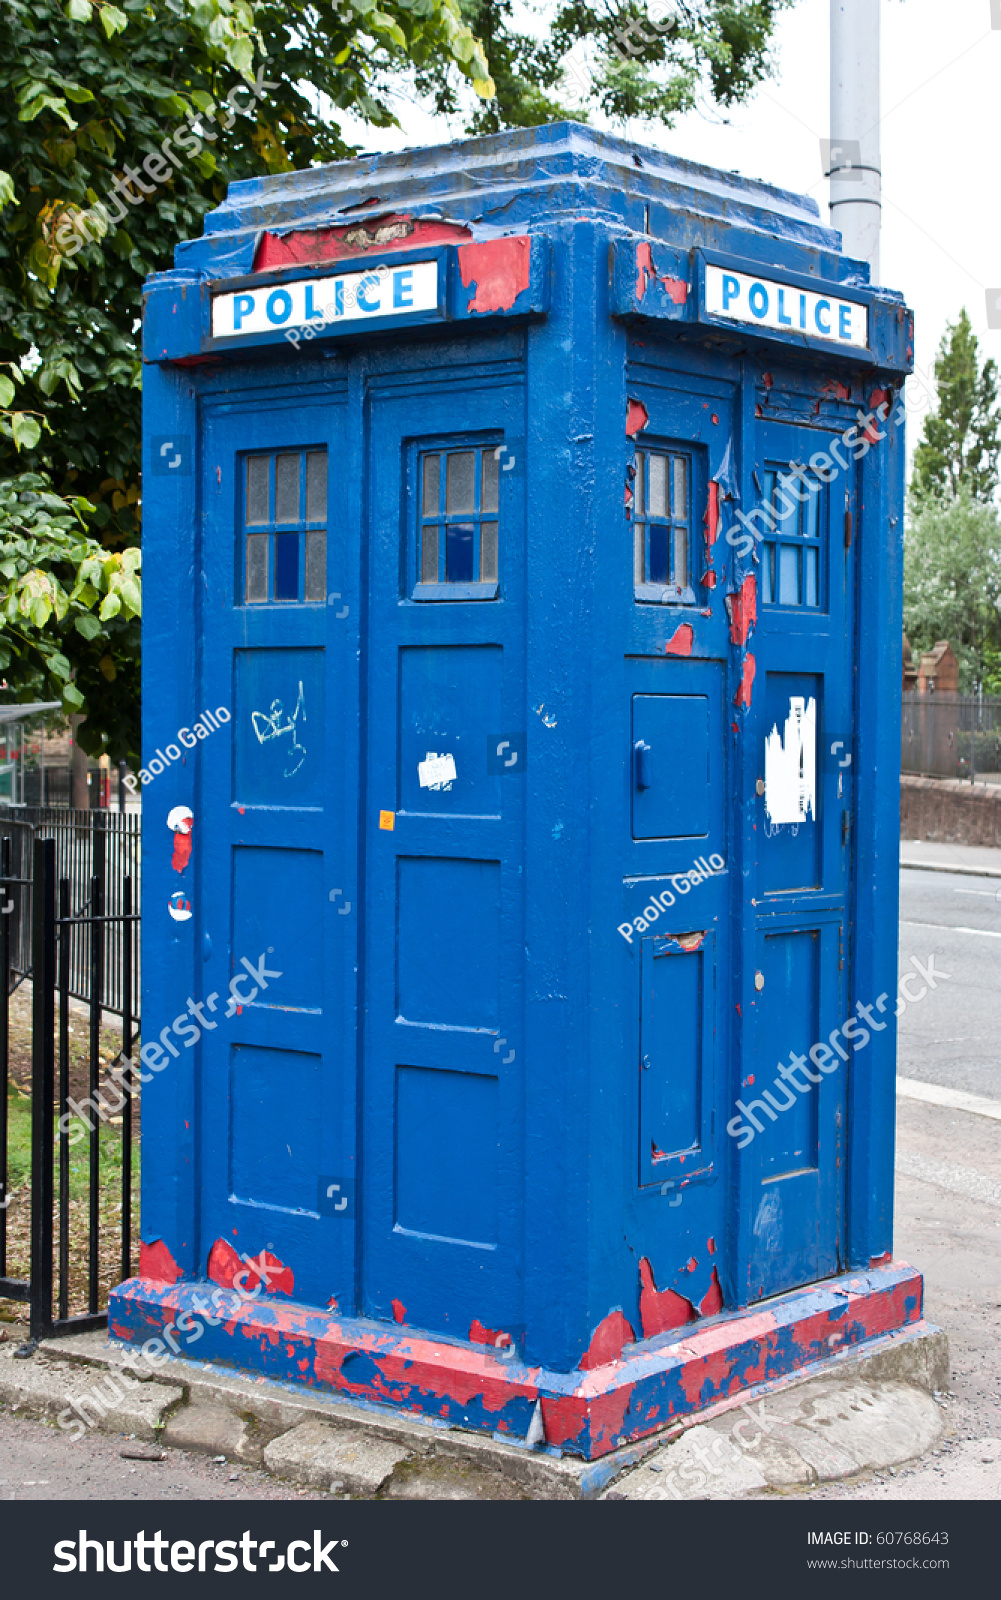 Blue Police Box In Glasgow, Industrial Area Stock Photo 60768643 ...